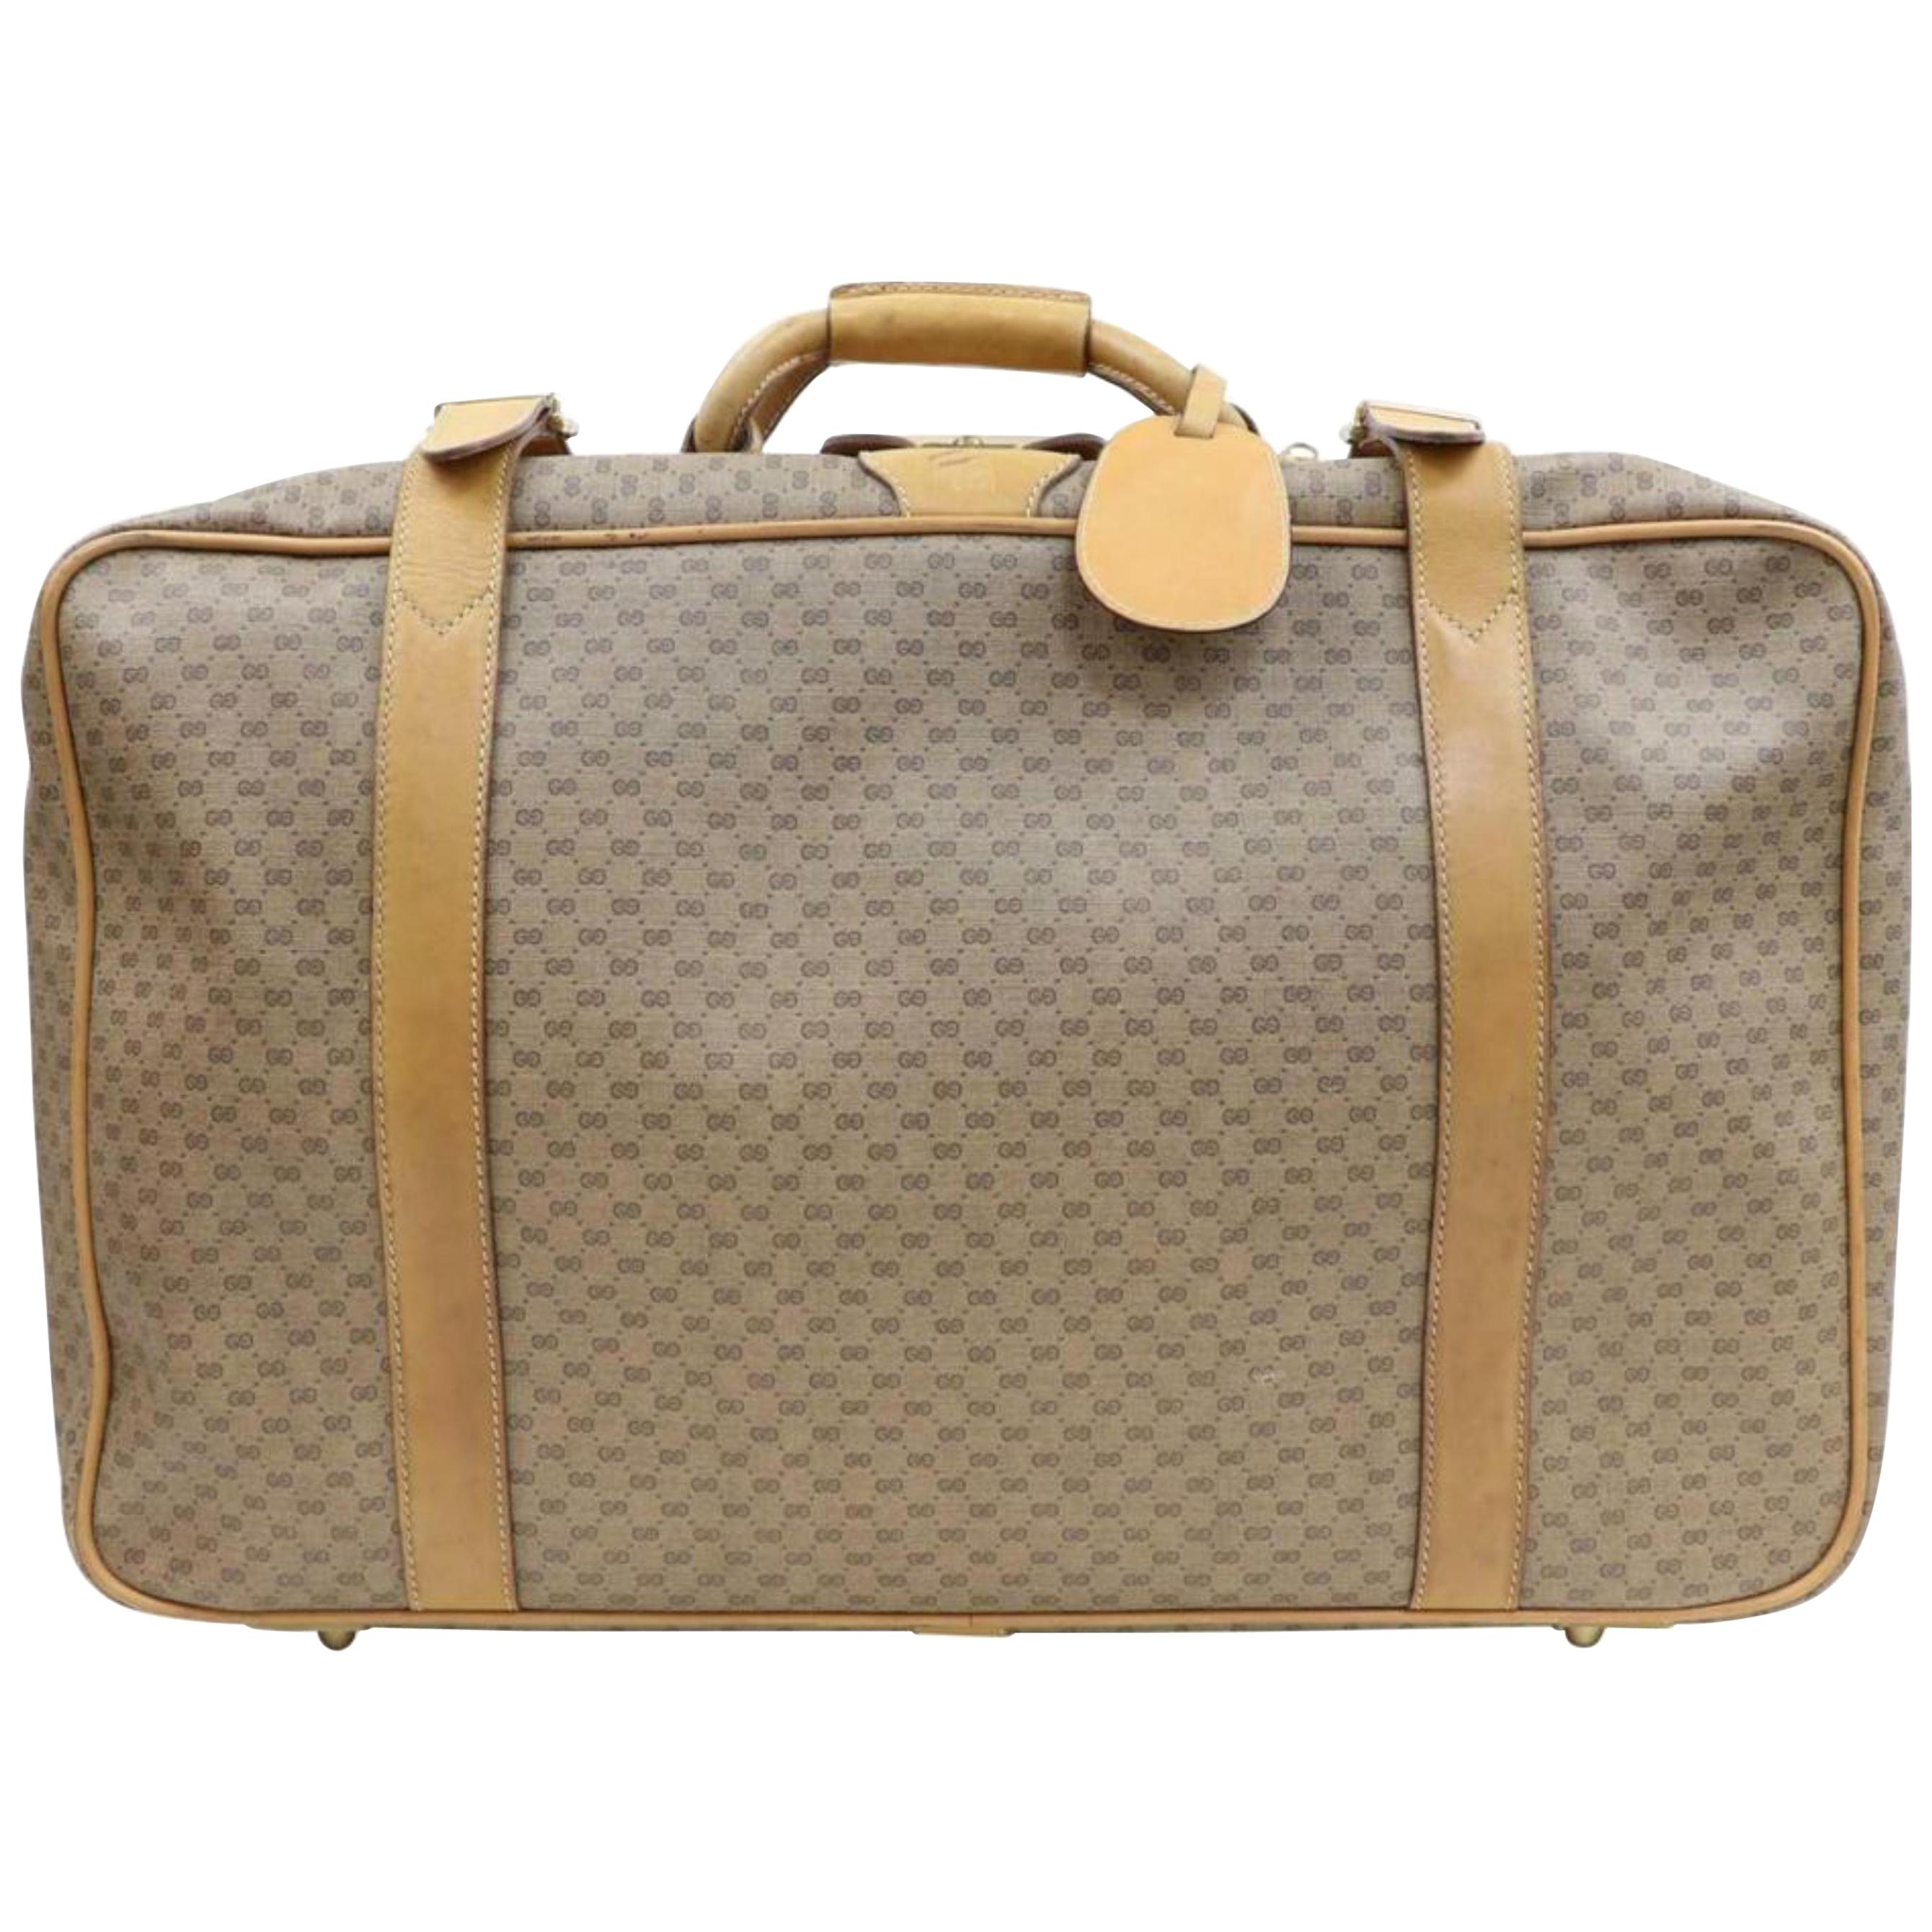 Gucci Micro Gg Logo Suitcase Luggage 870257 Coated Canvas Weekend/Travel Bag For Sale